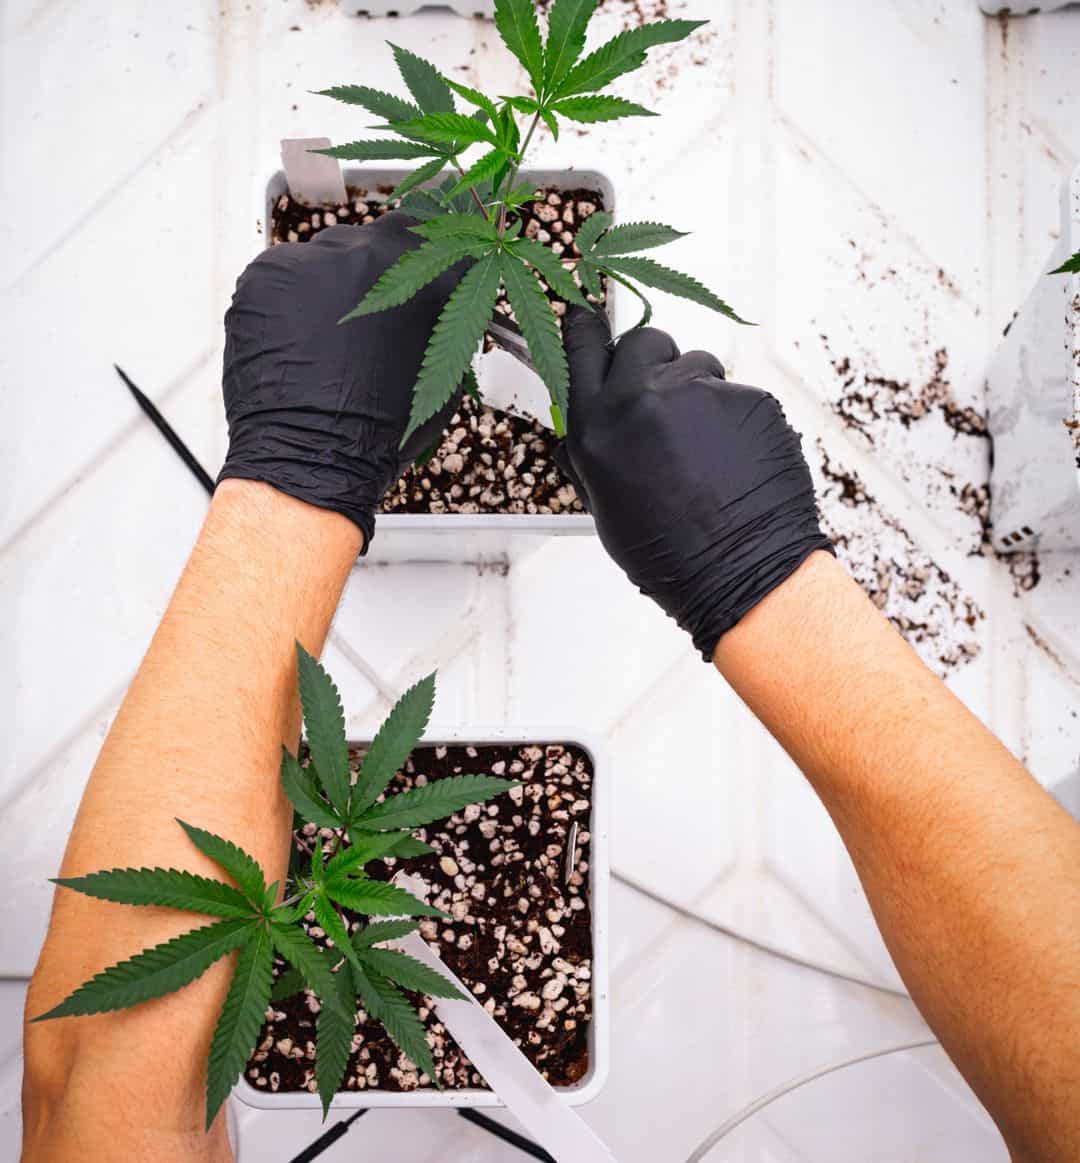 Cannabis plant seedlings being trimmed.